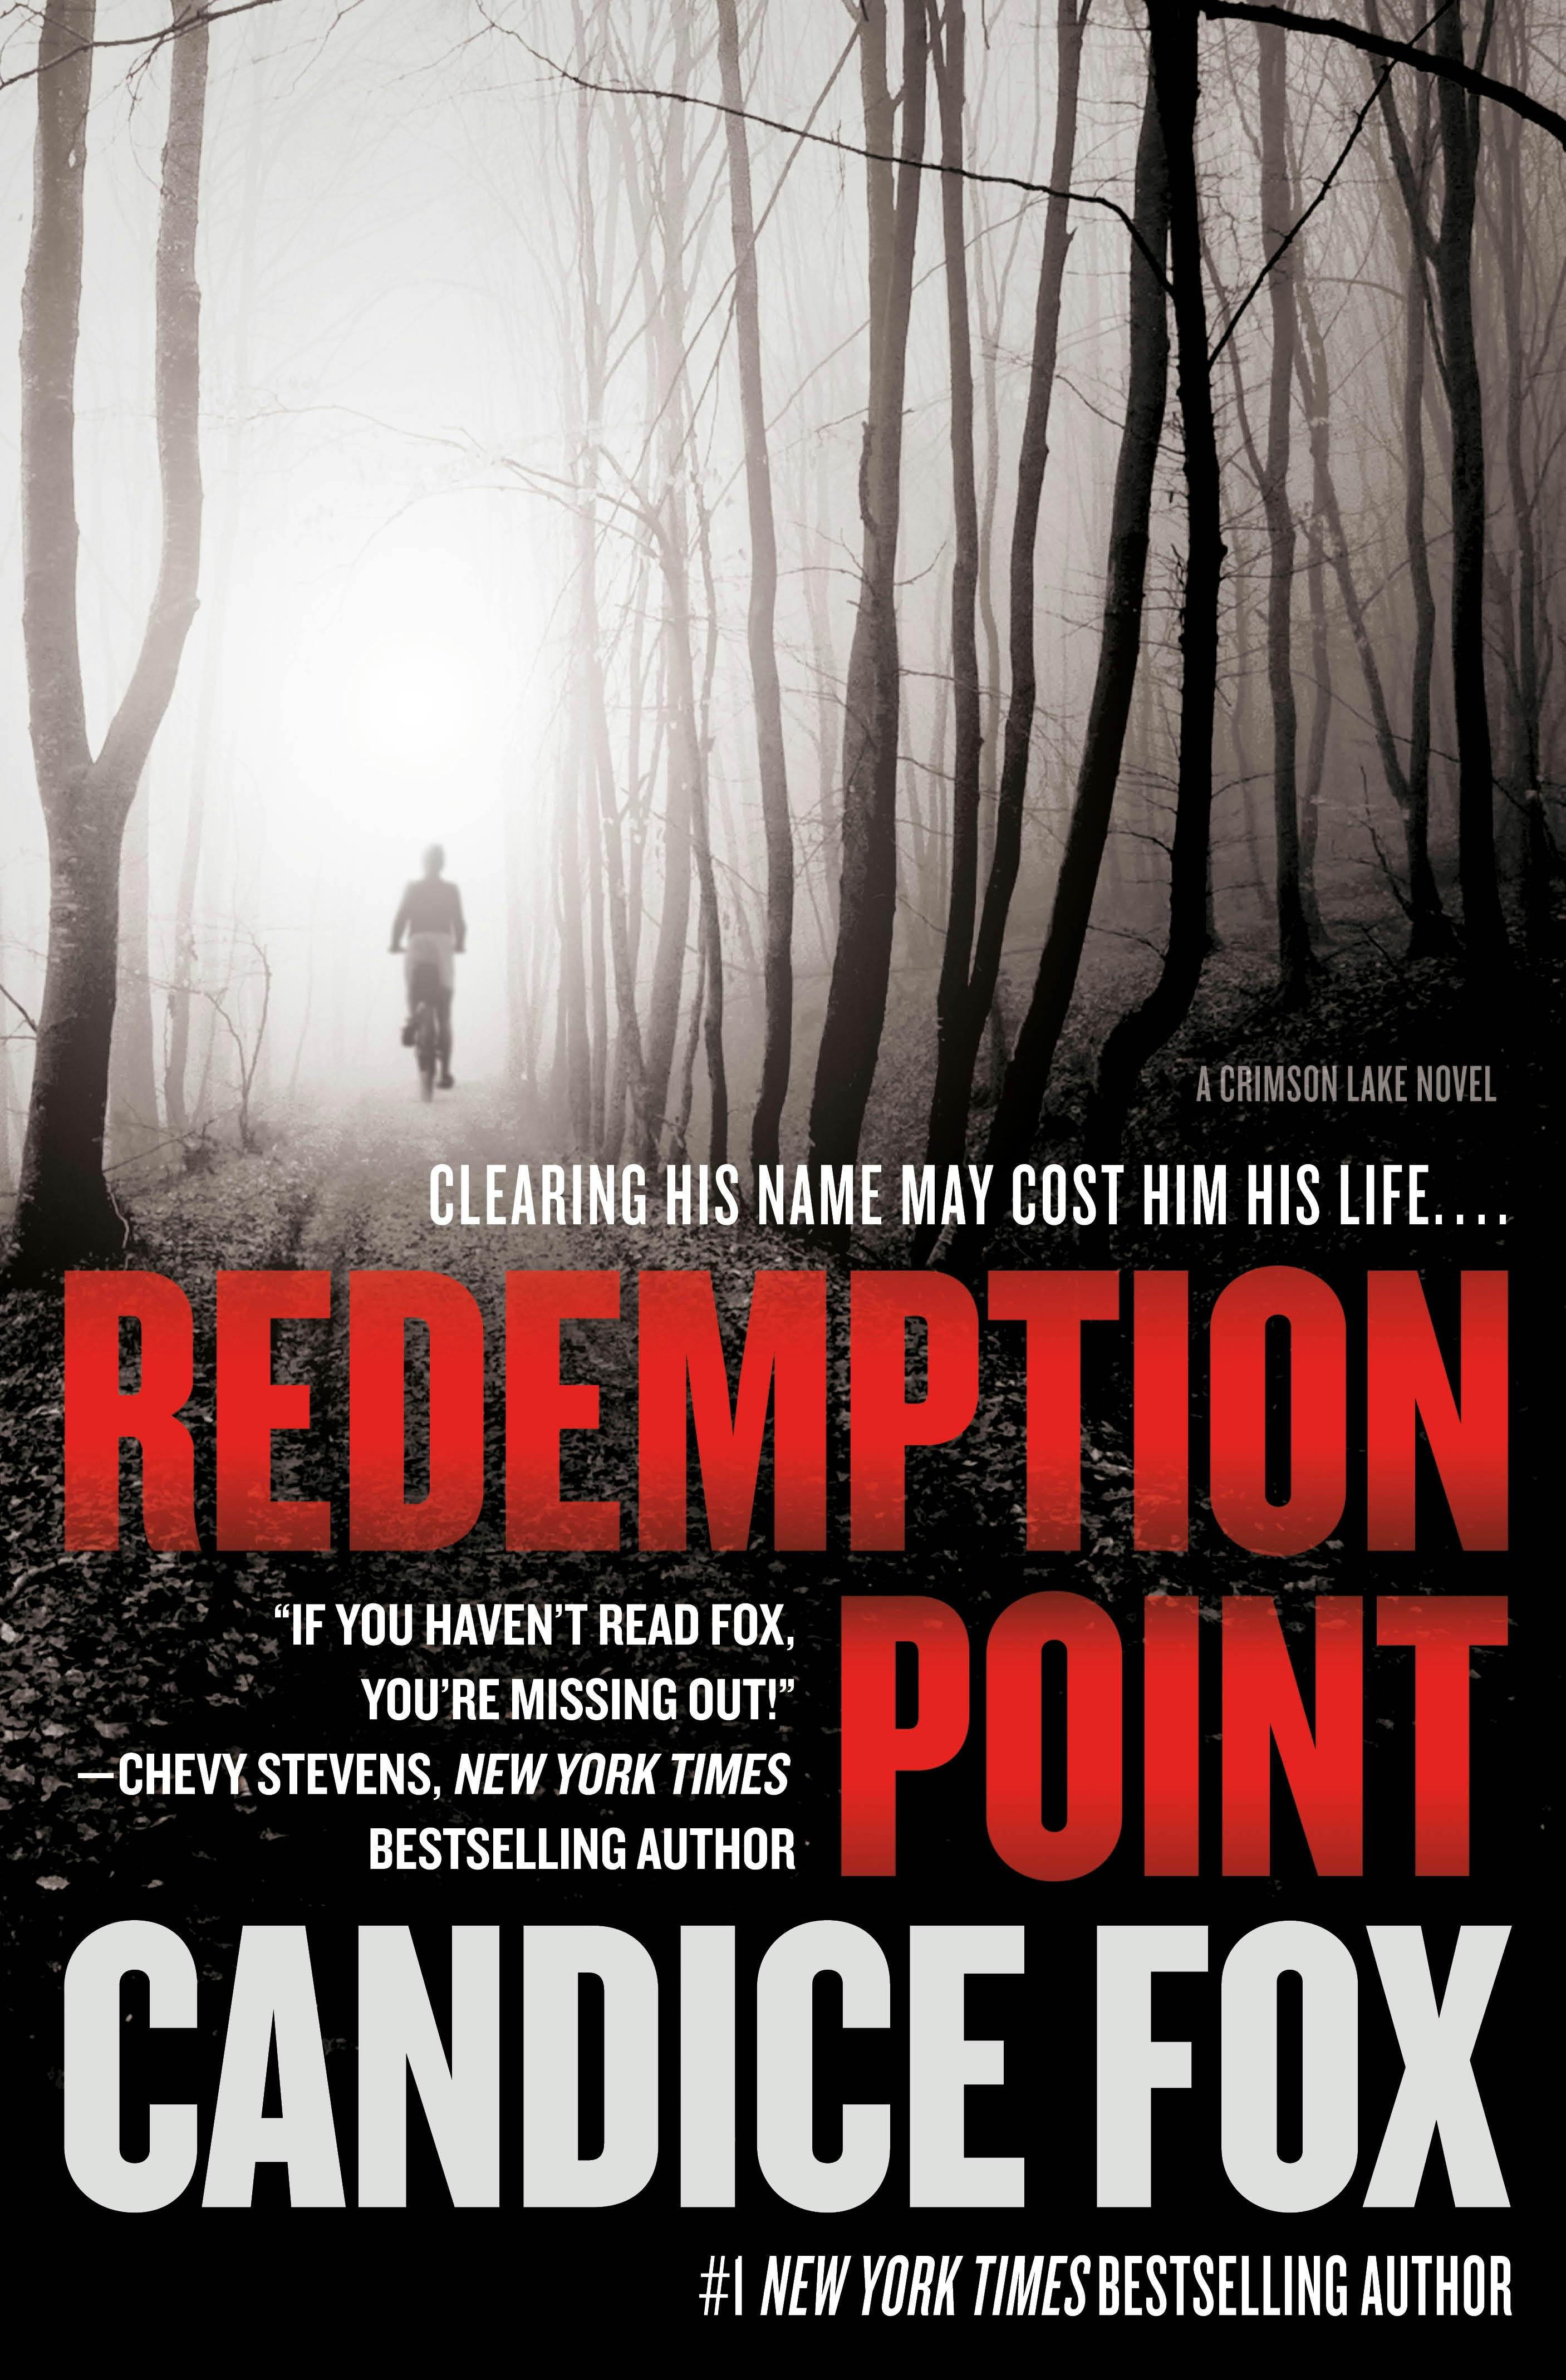 Cover for the book titled as: Redemption Point